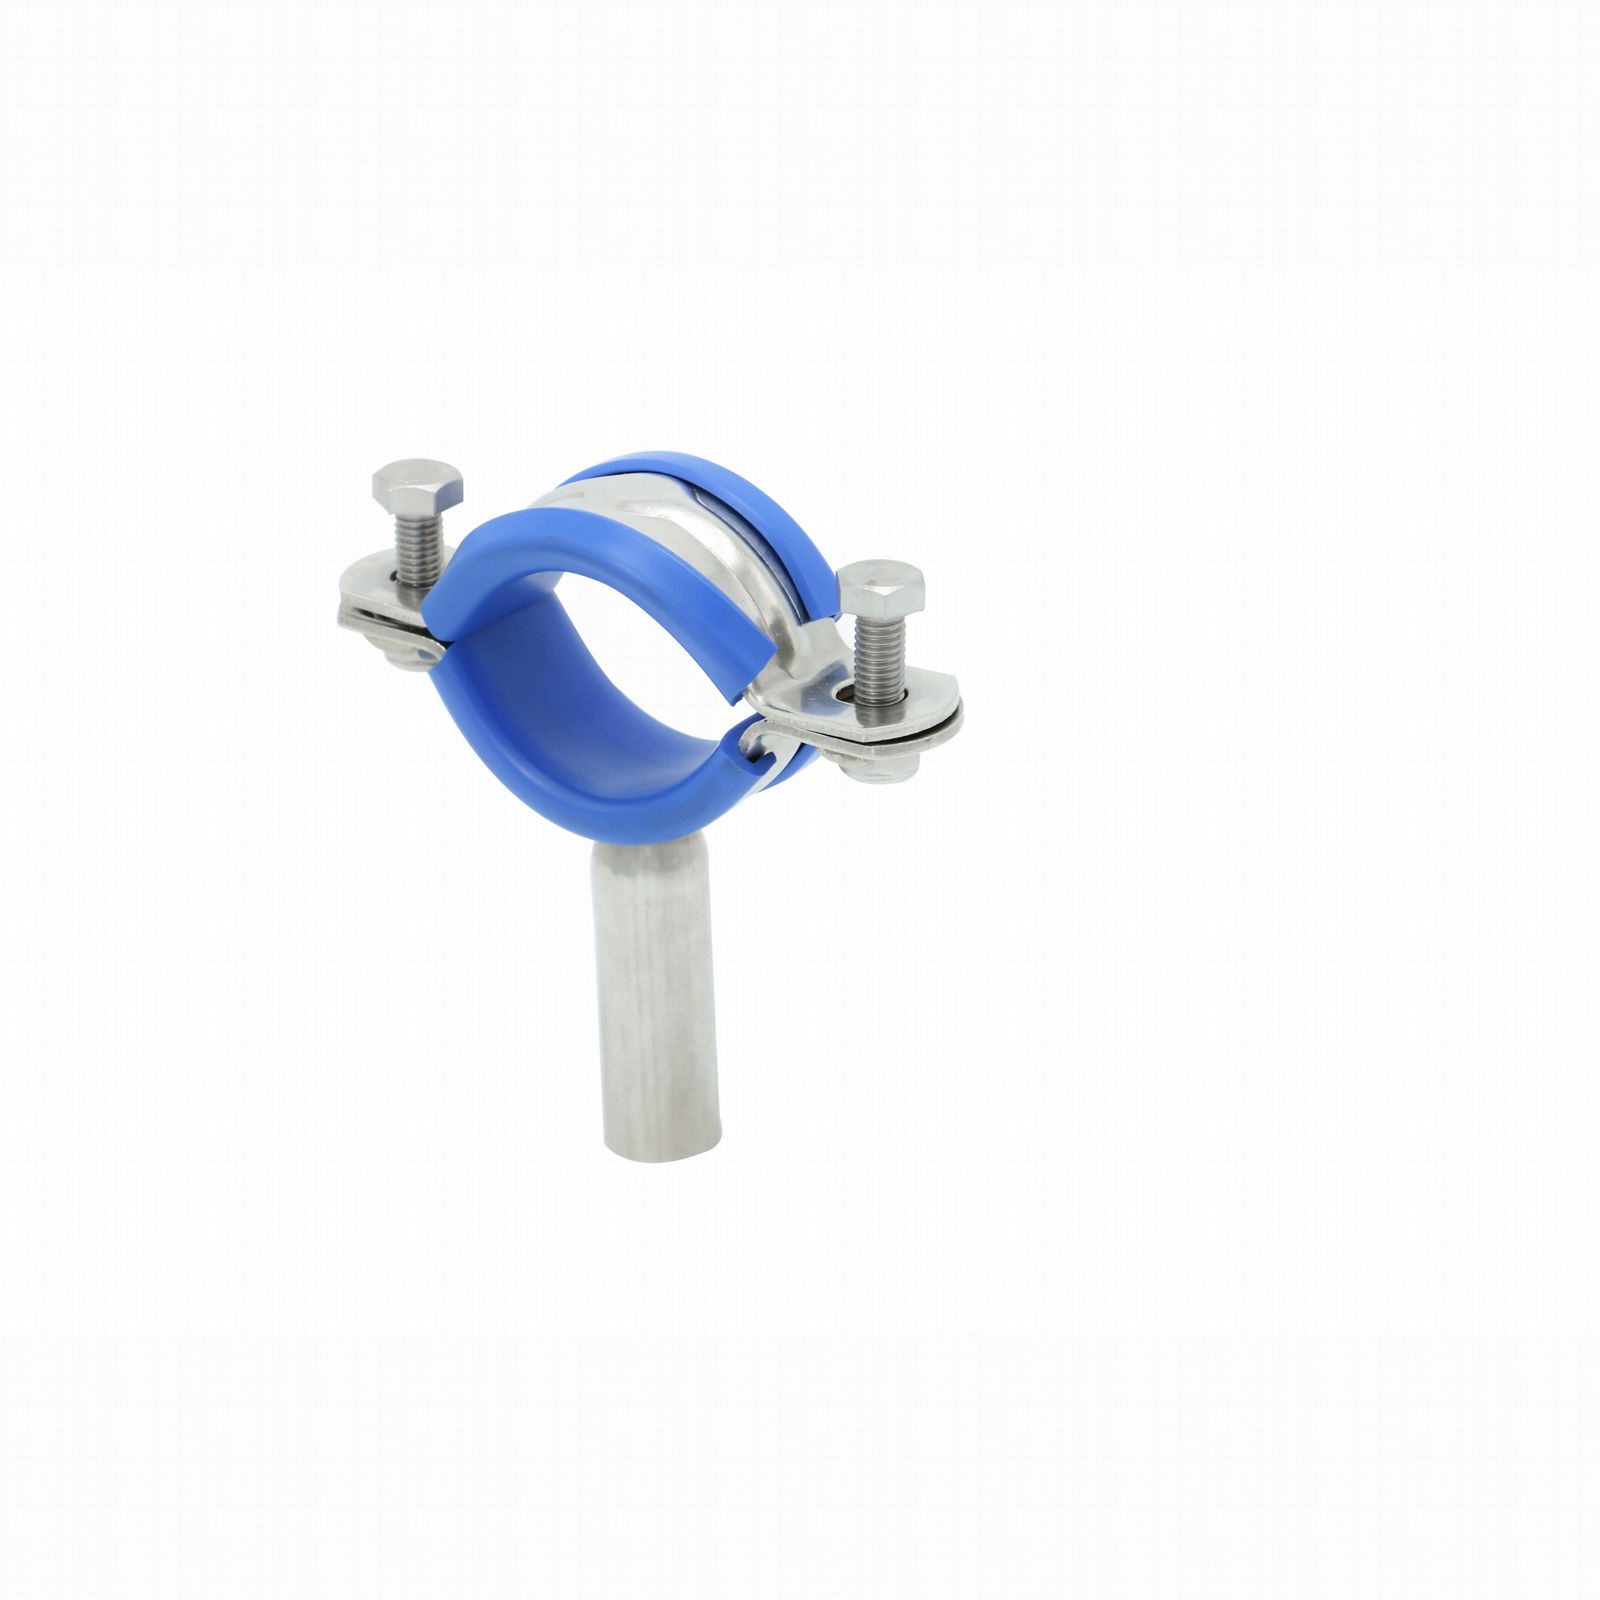 SMS Stainless Steel Piping Supports  with Blue Silicone Gaskets 3